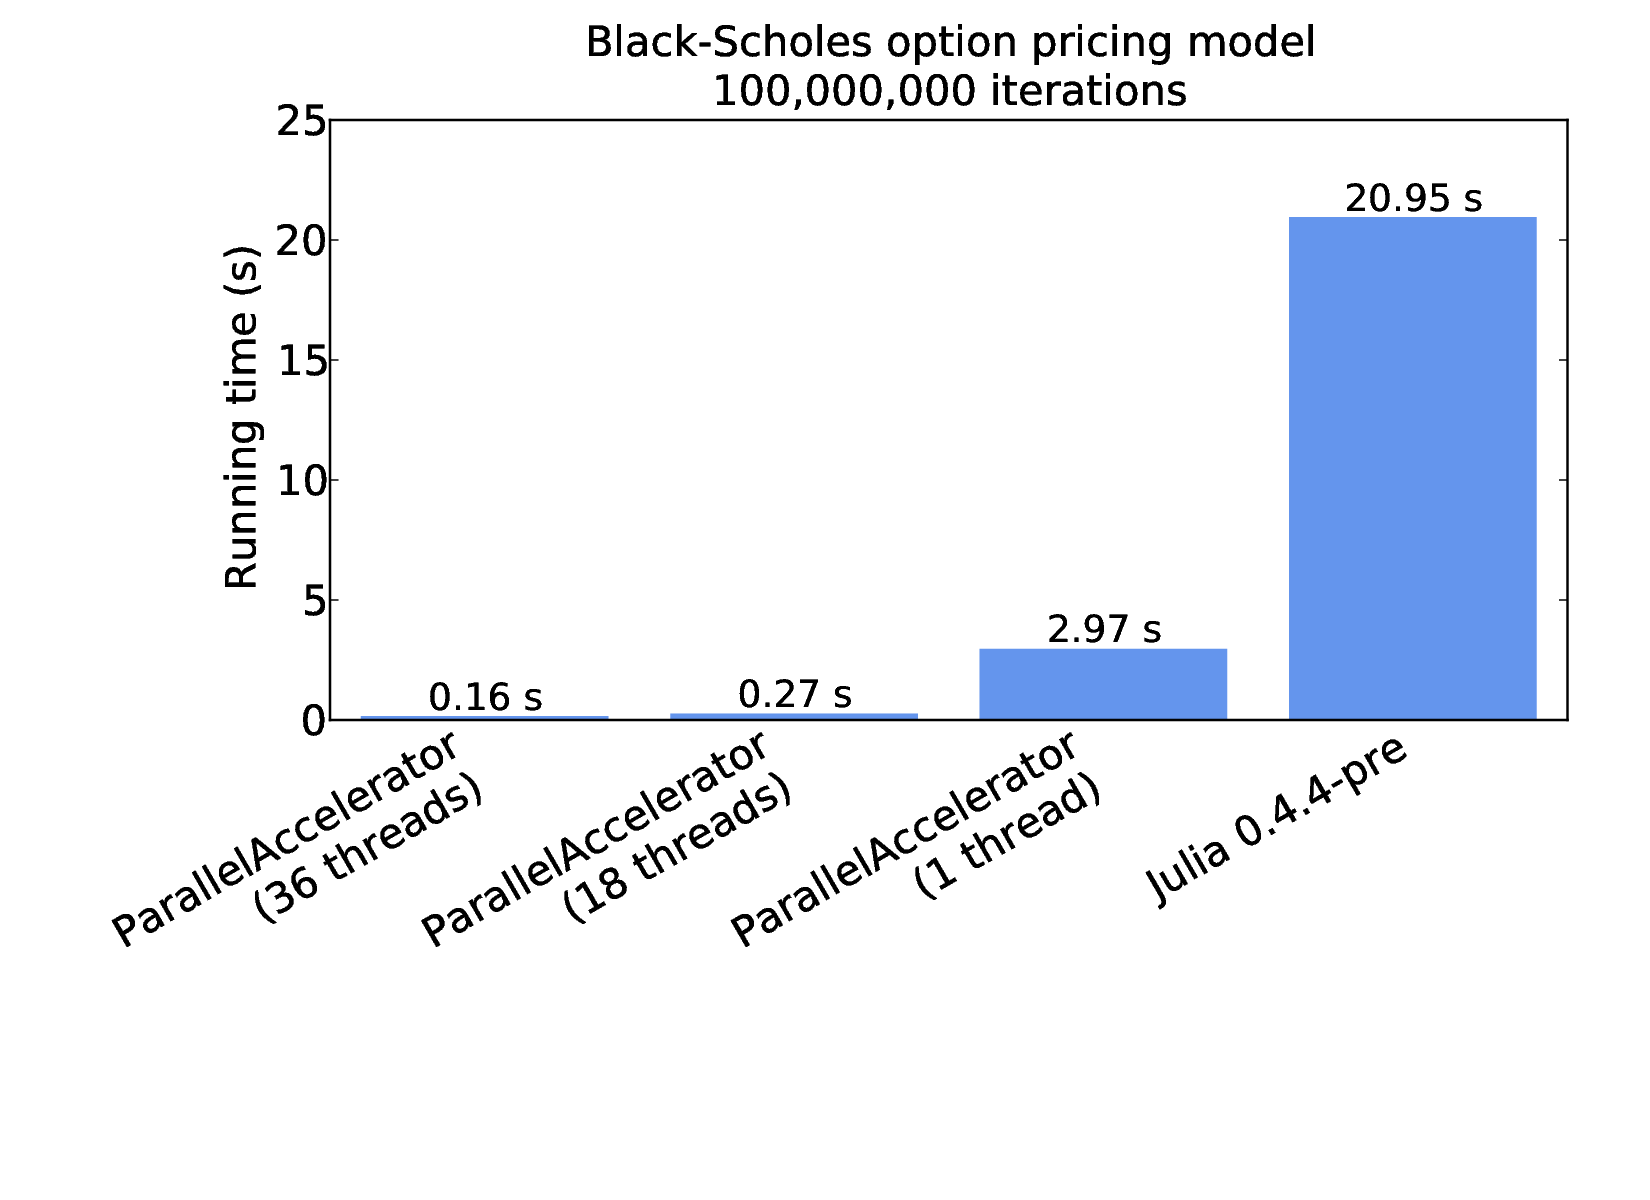 Benchmark results for plain Julia and ParallelAccelerator implementations of the Black-Scholes formula